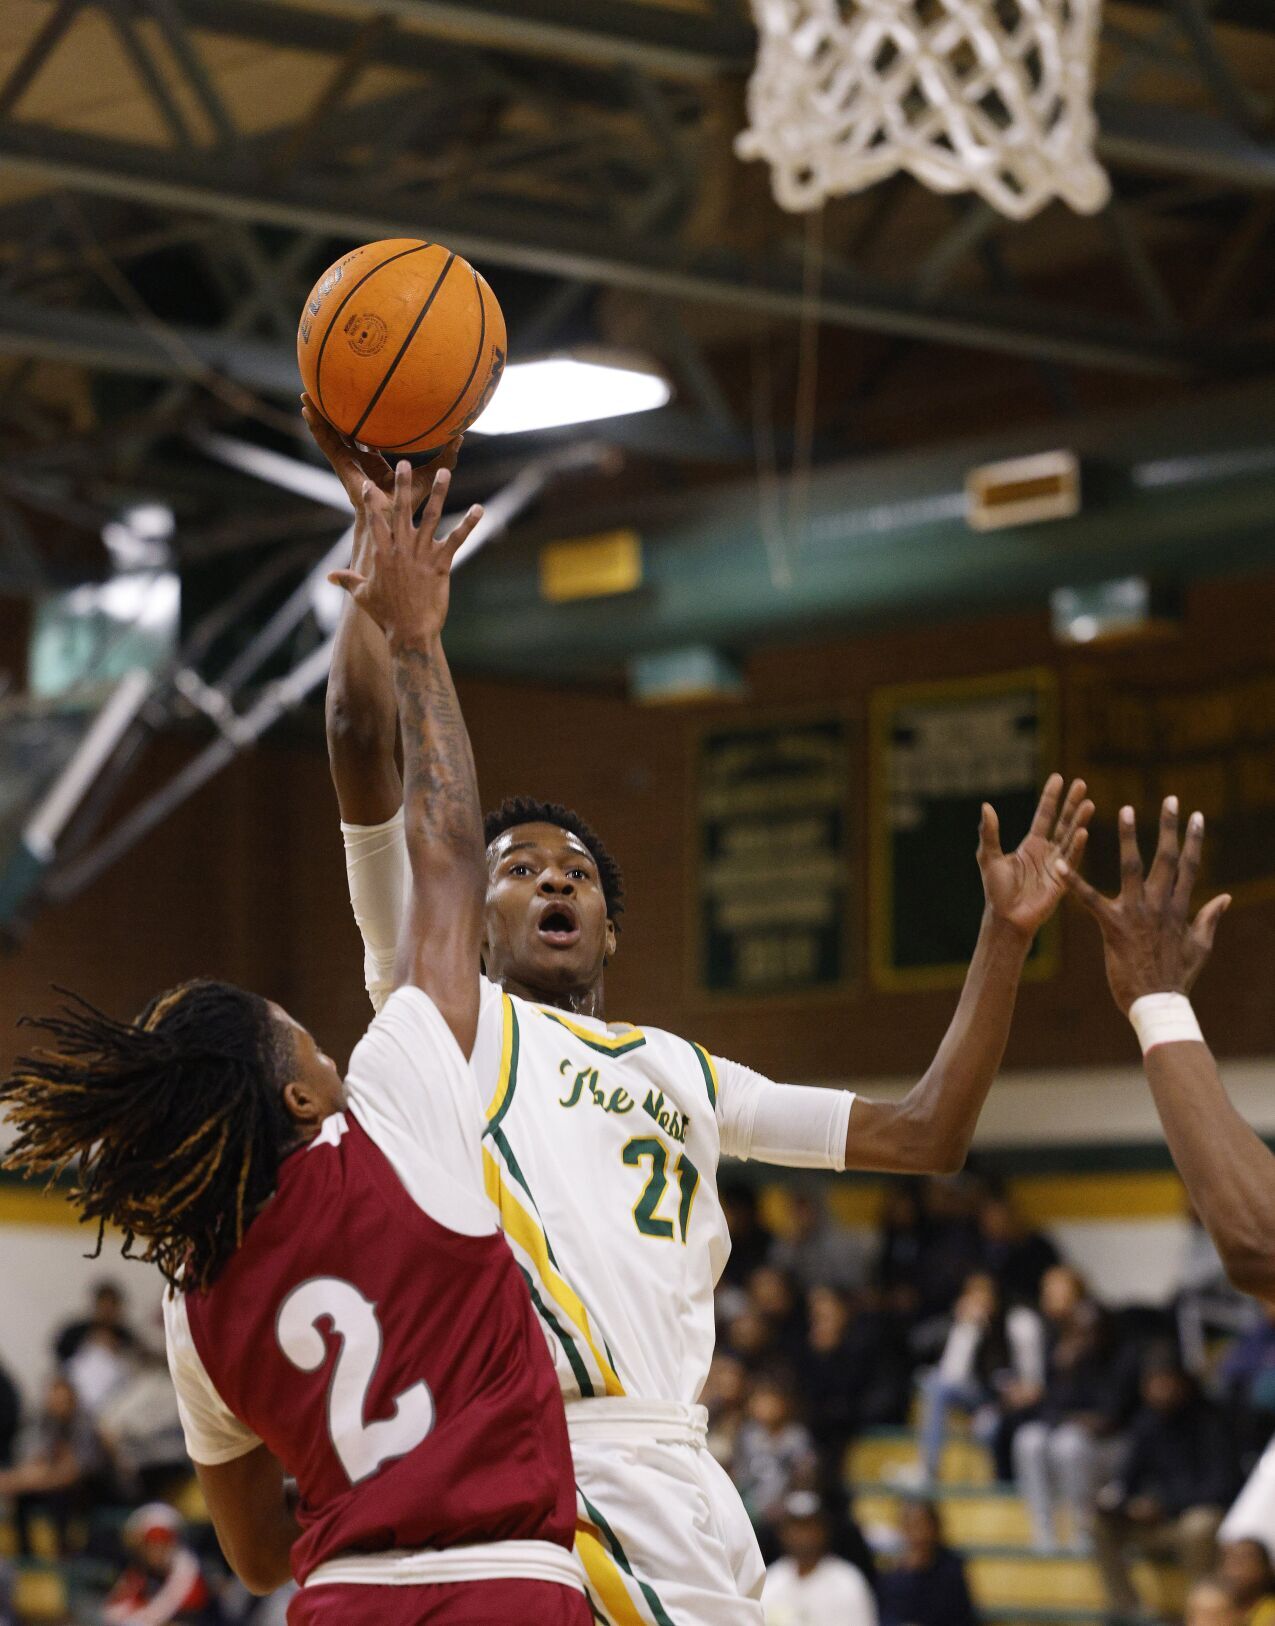 Central Cabarrus defeats Smith in NCHSAA 3A quarterfinal; Kendric Johnson scores 14 points